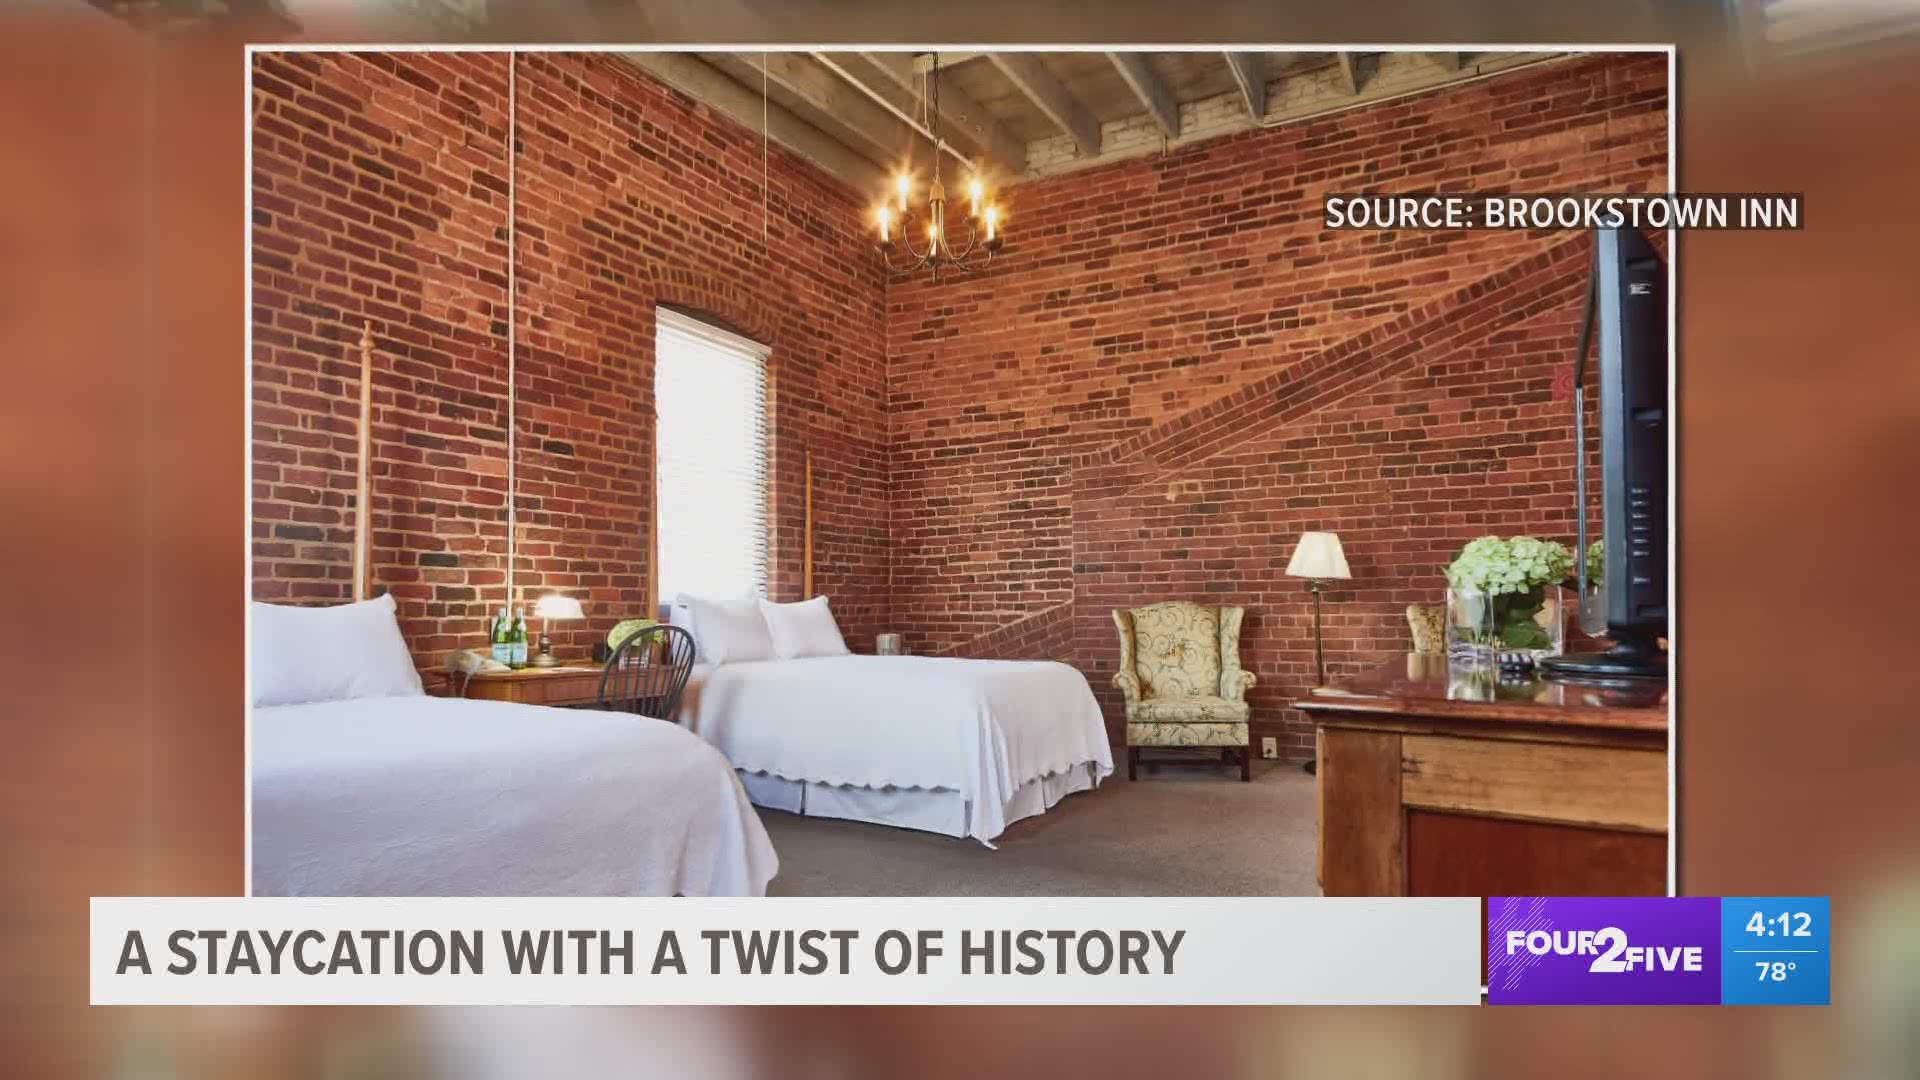 Getaway package shows off Triad history